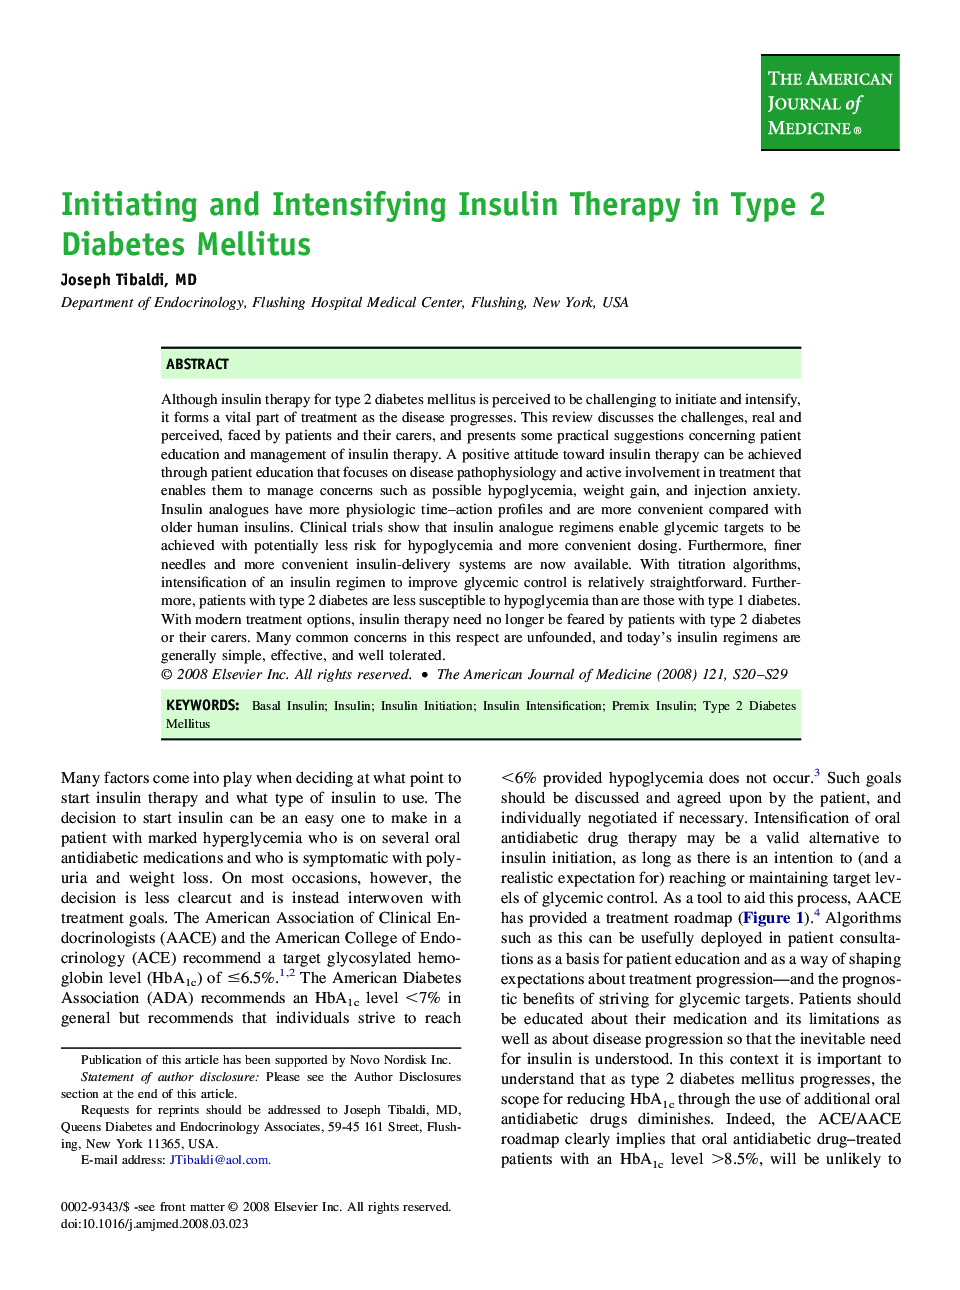 Initiating and Intensifying Insulin Therapy in Type 2 Diabetes Mellitus